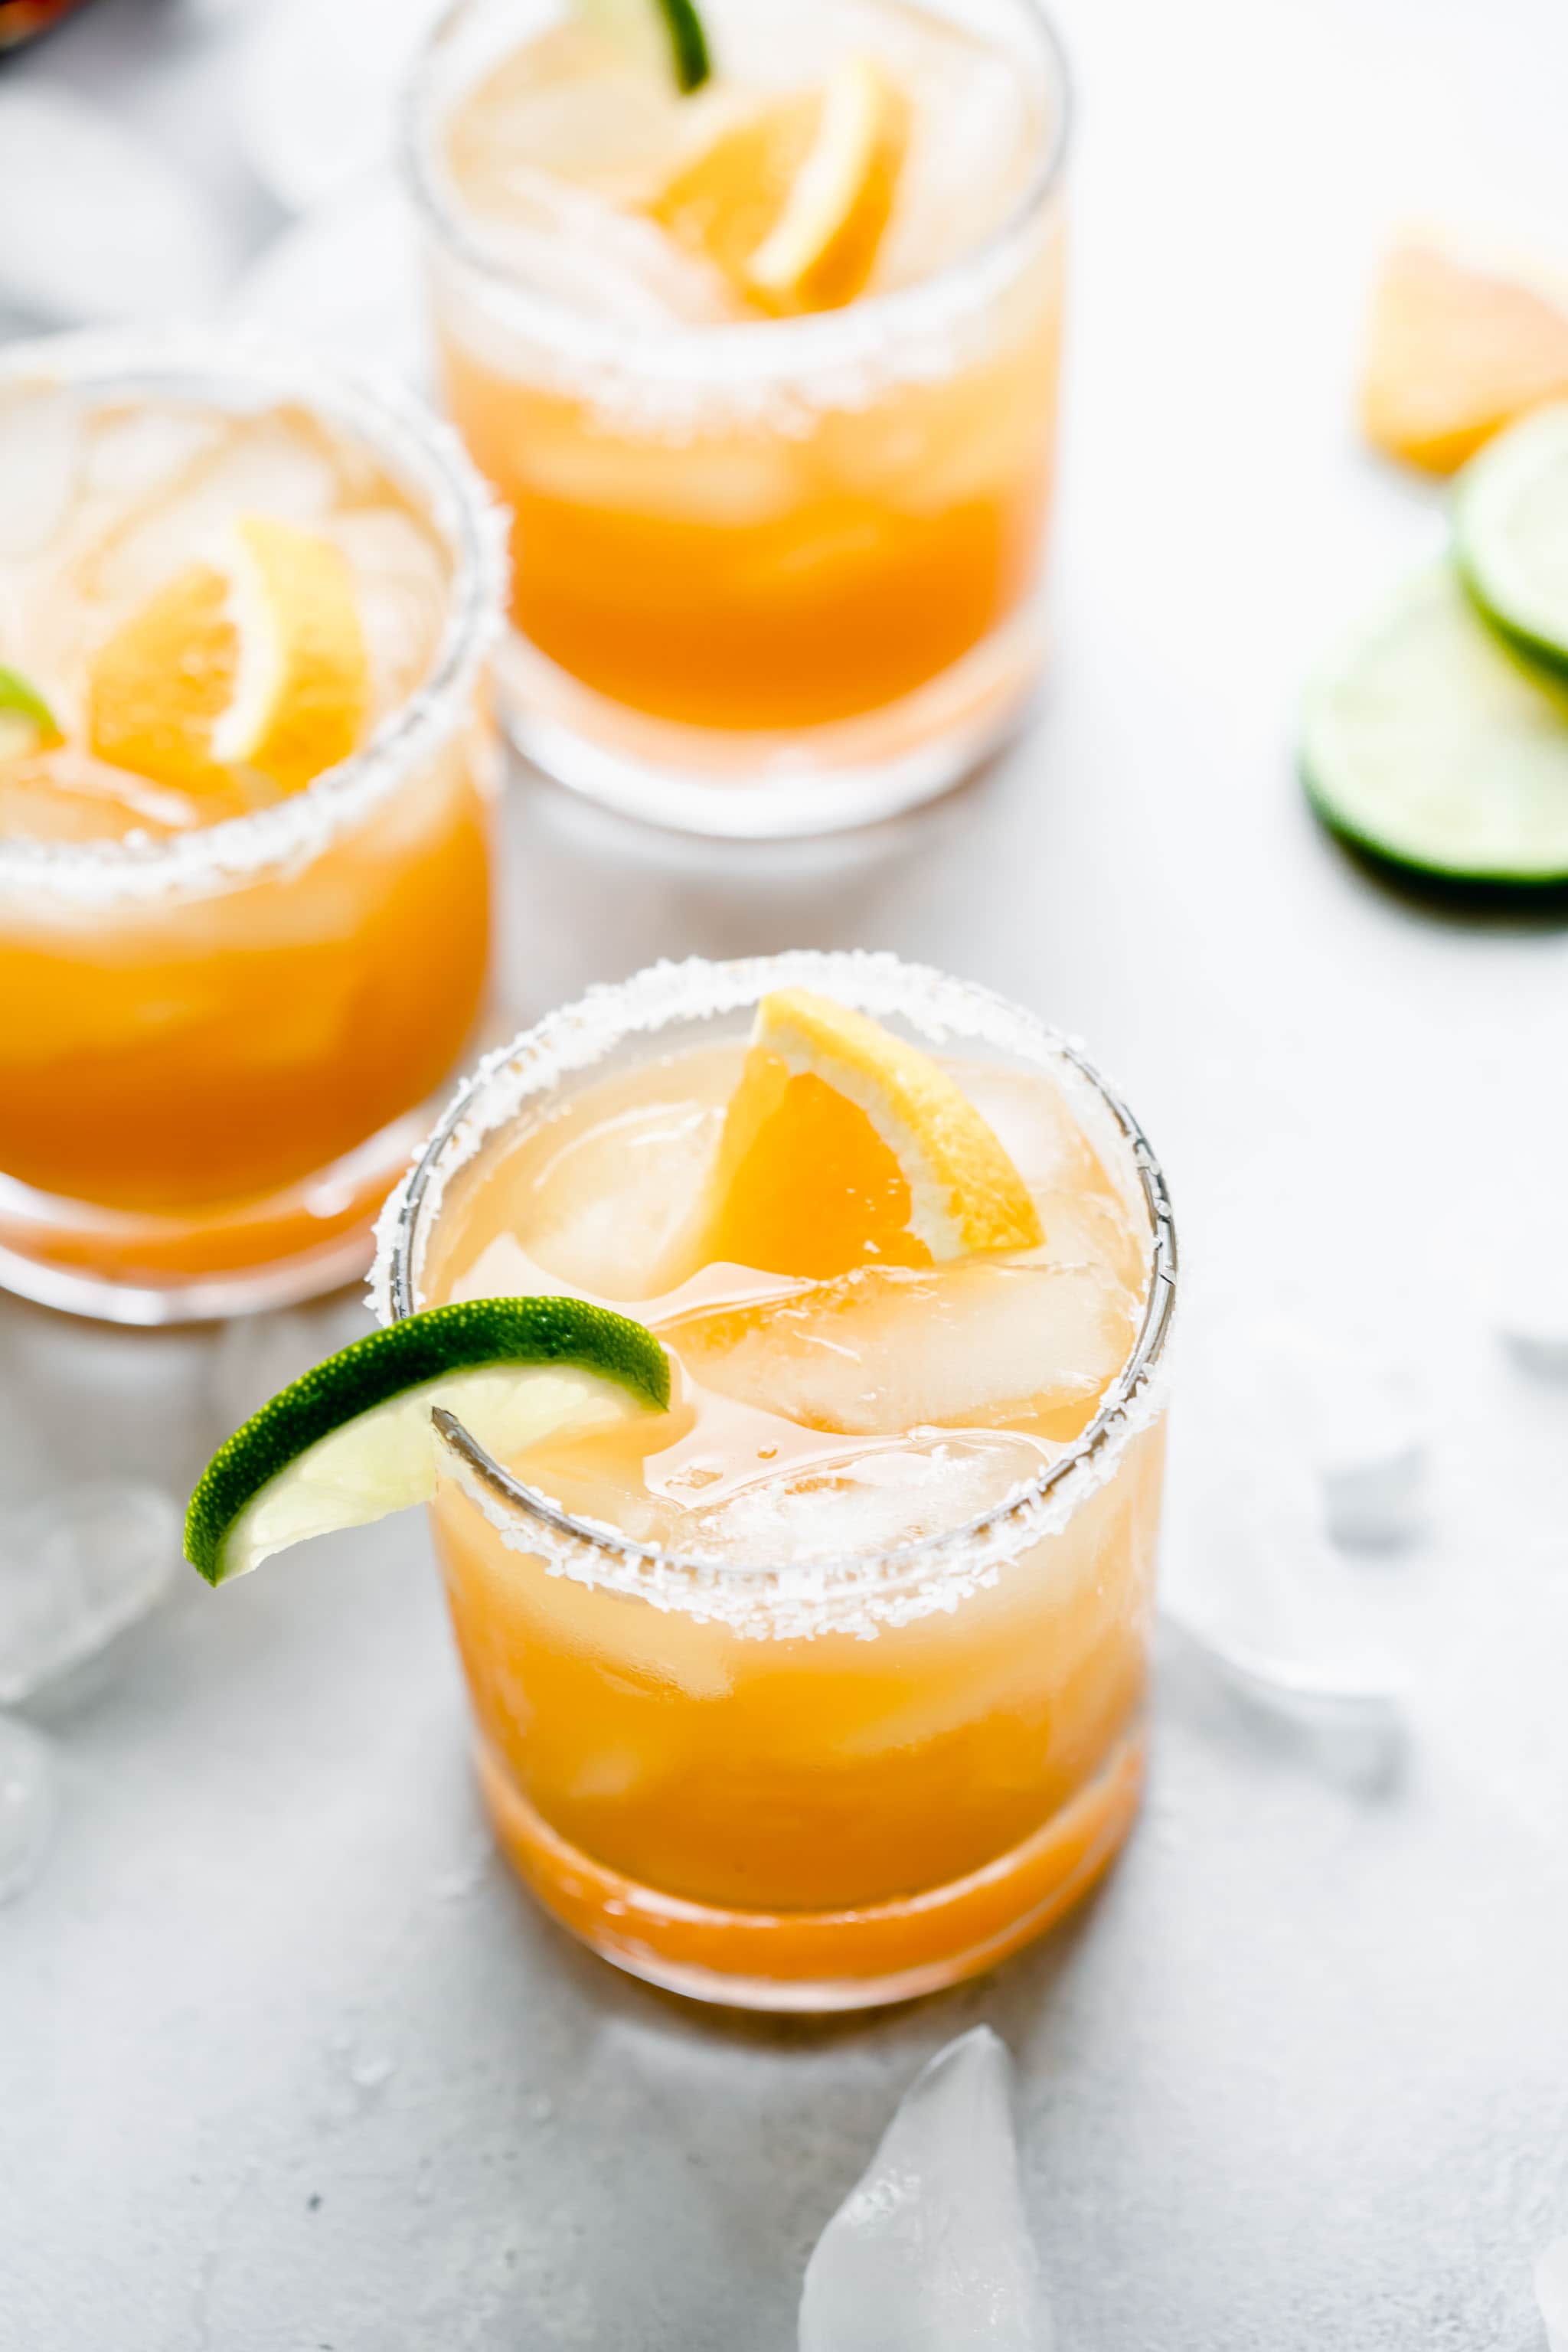 Three glasses of Italian Margarita rimmed with salt and garnished with orange and lime slices.